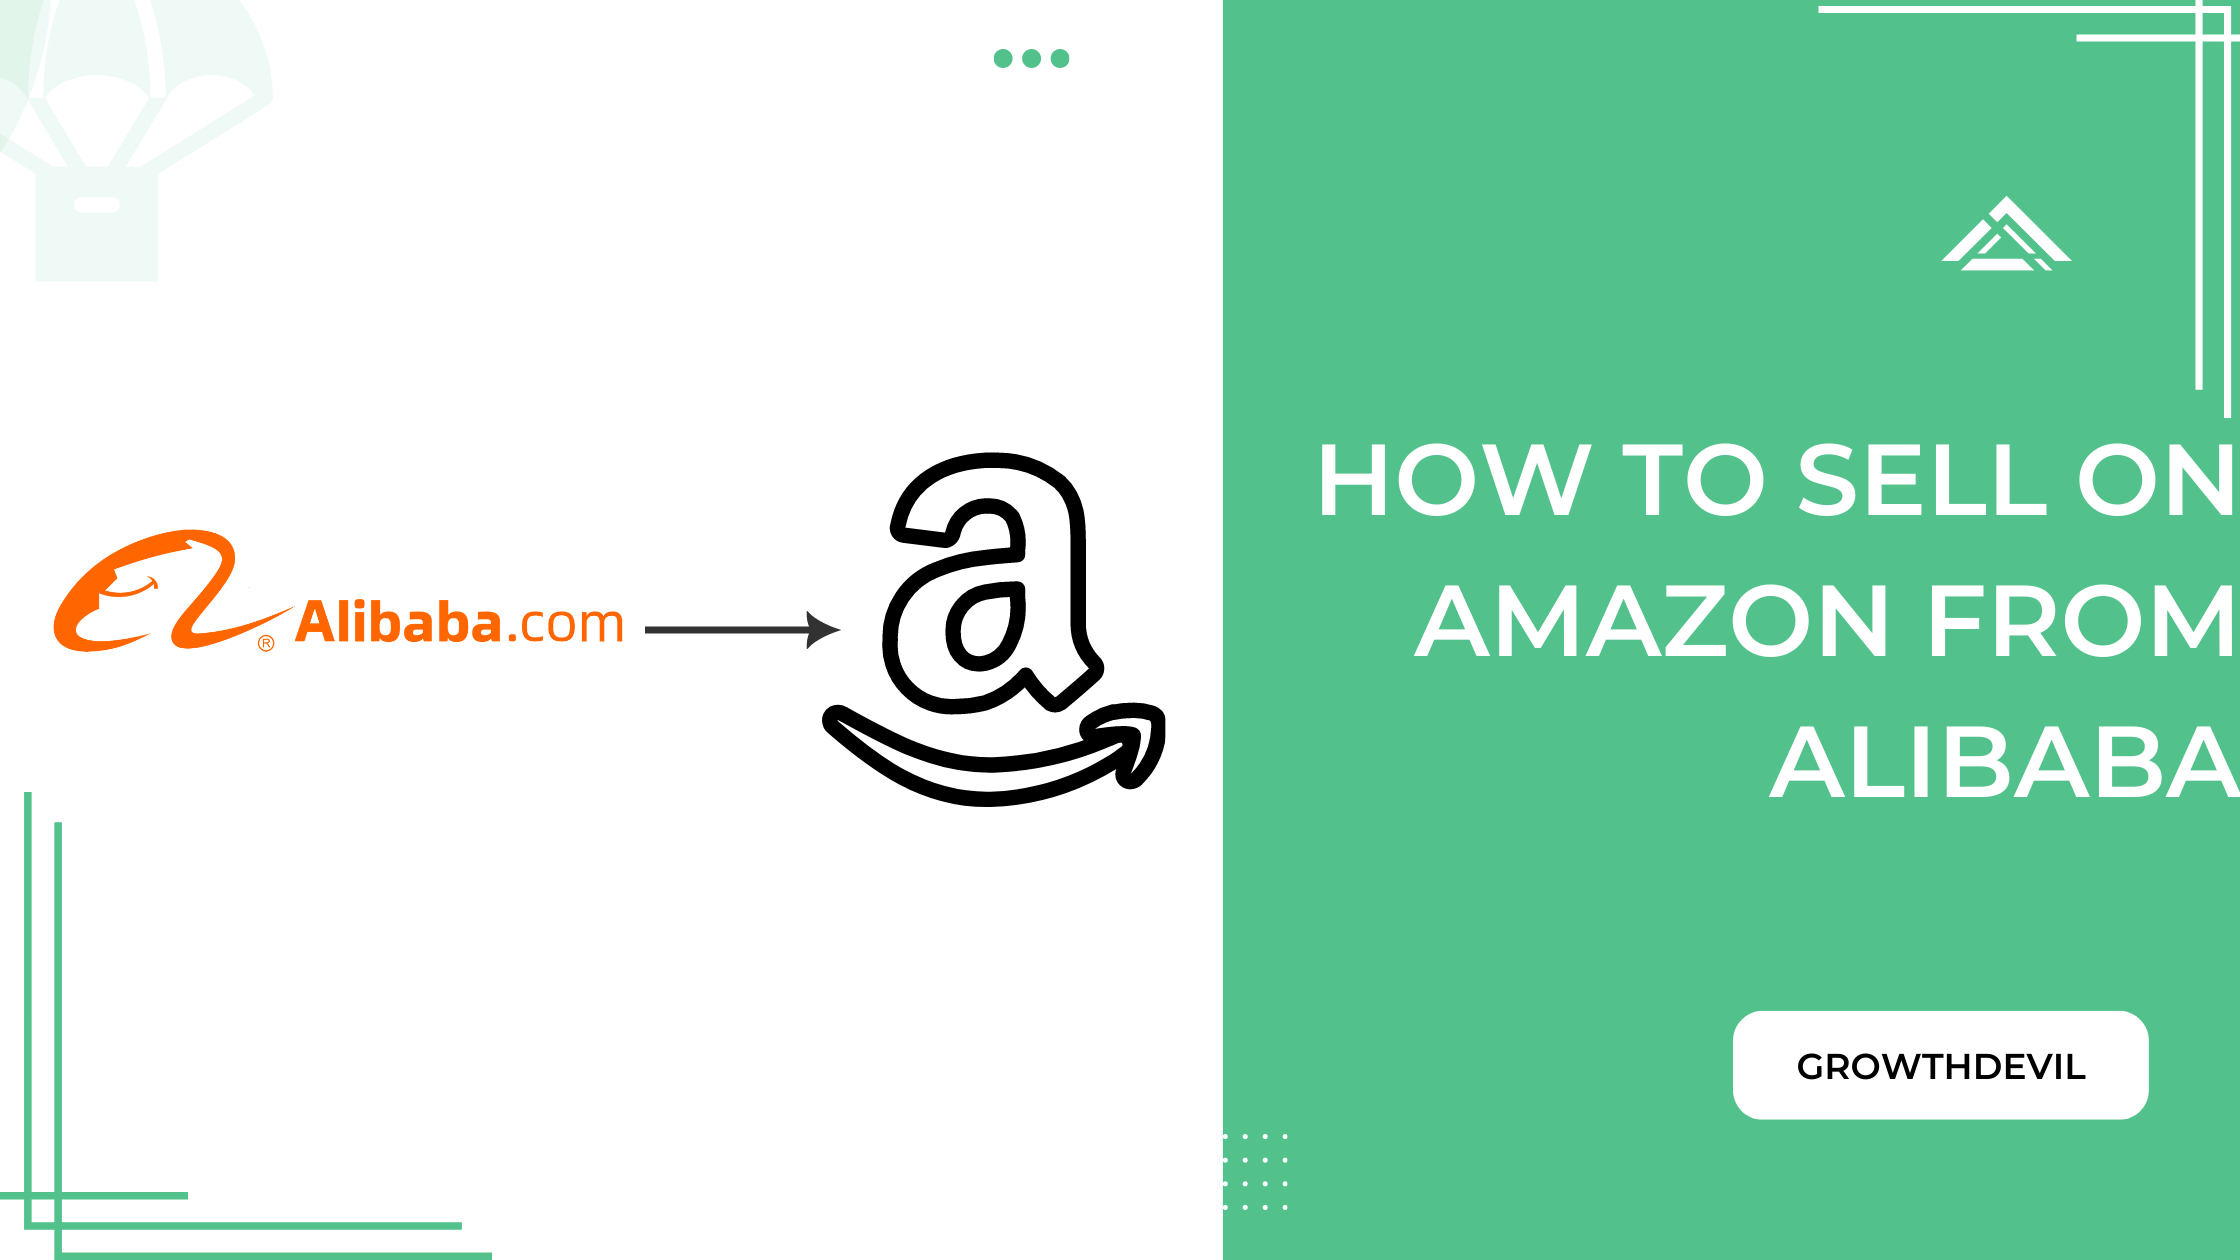 How To Sell On Amazon From Alibaba - GrowthDevil